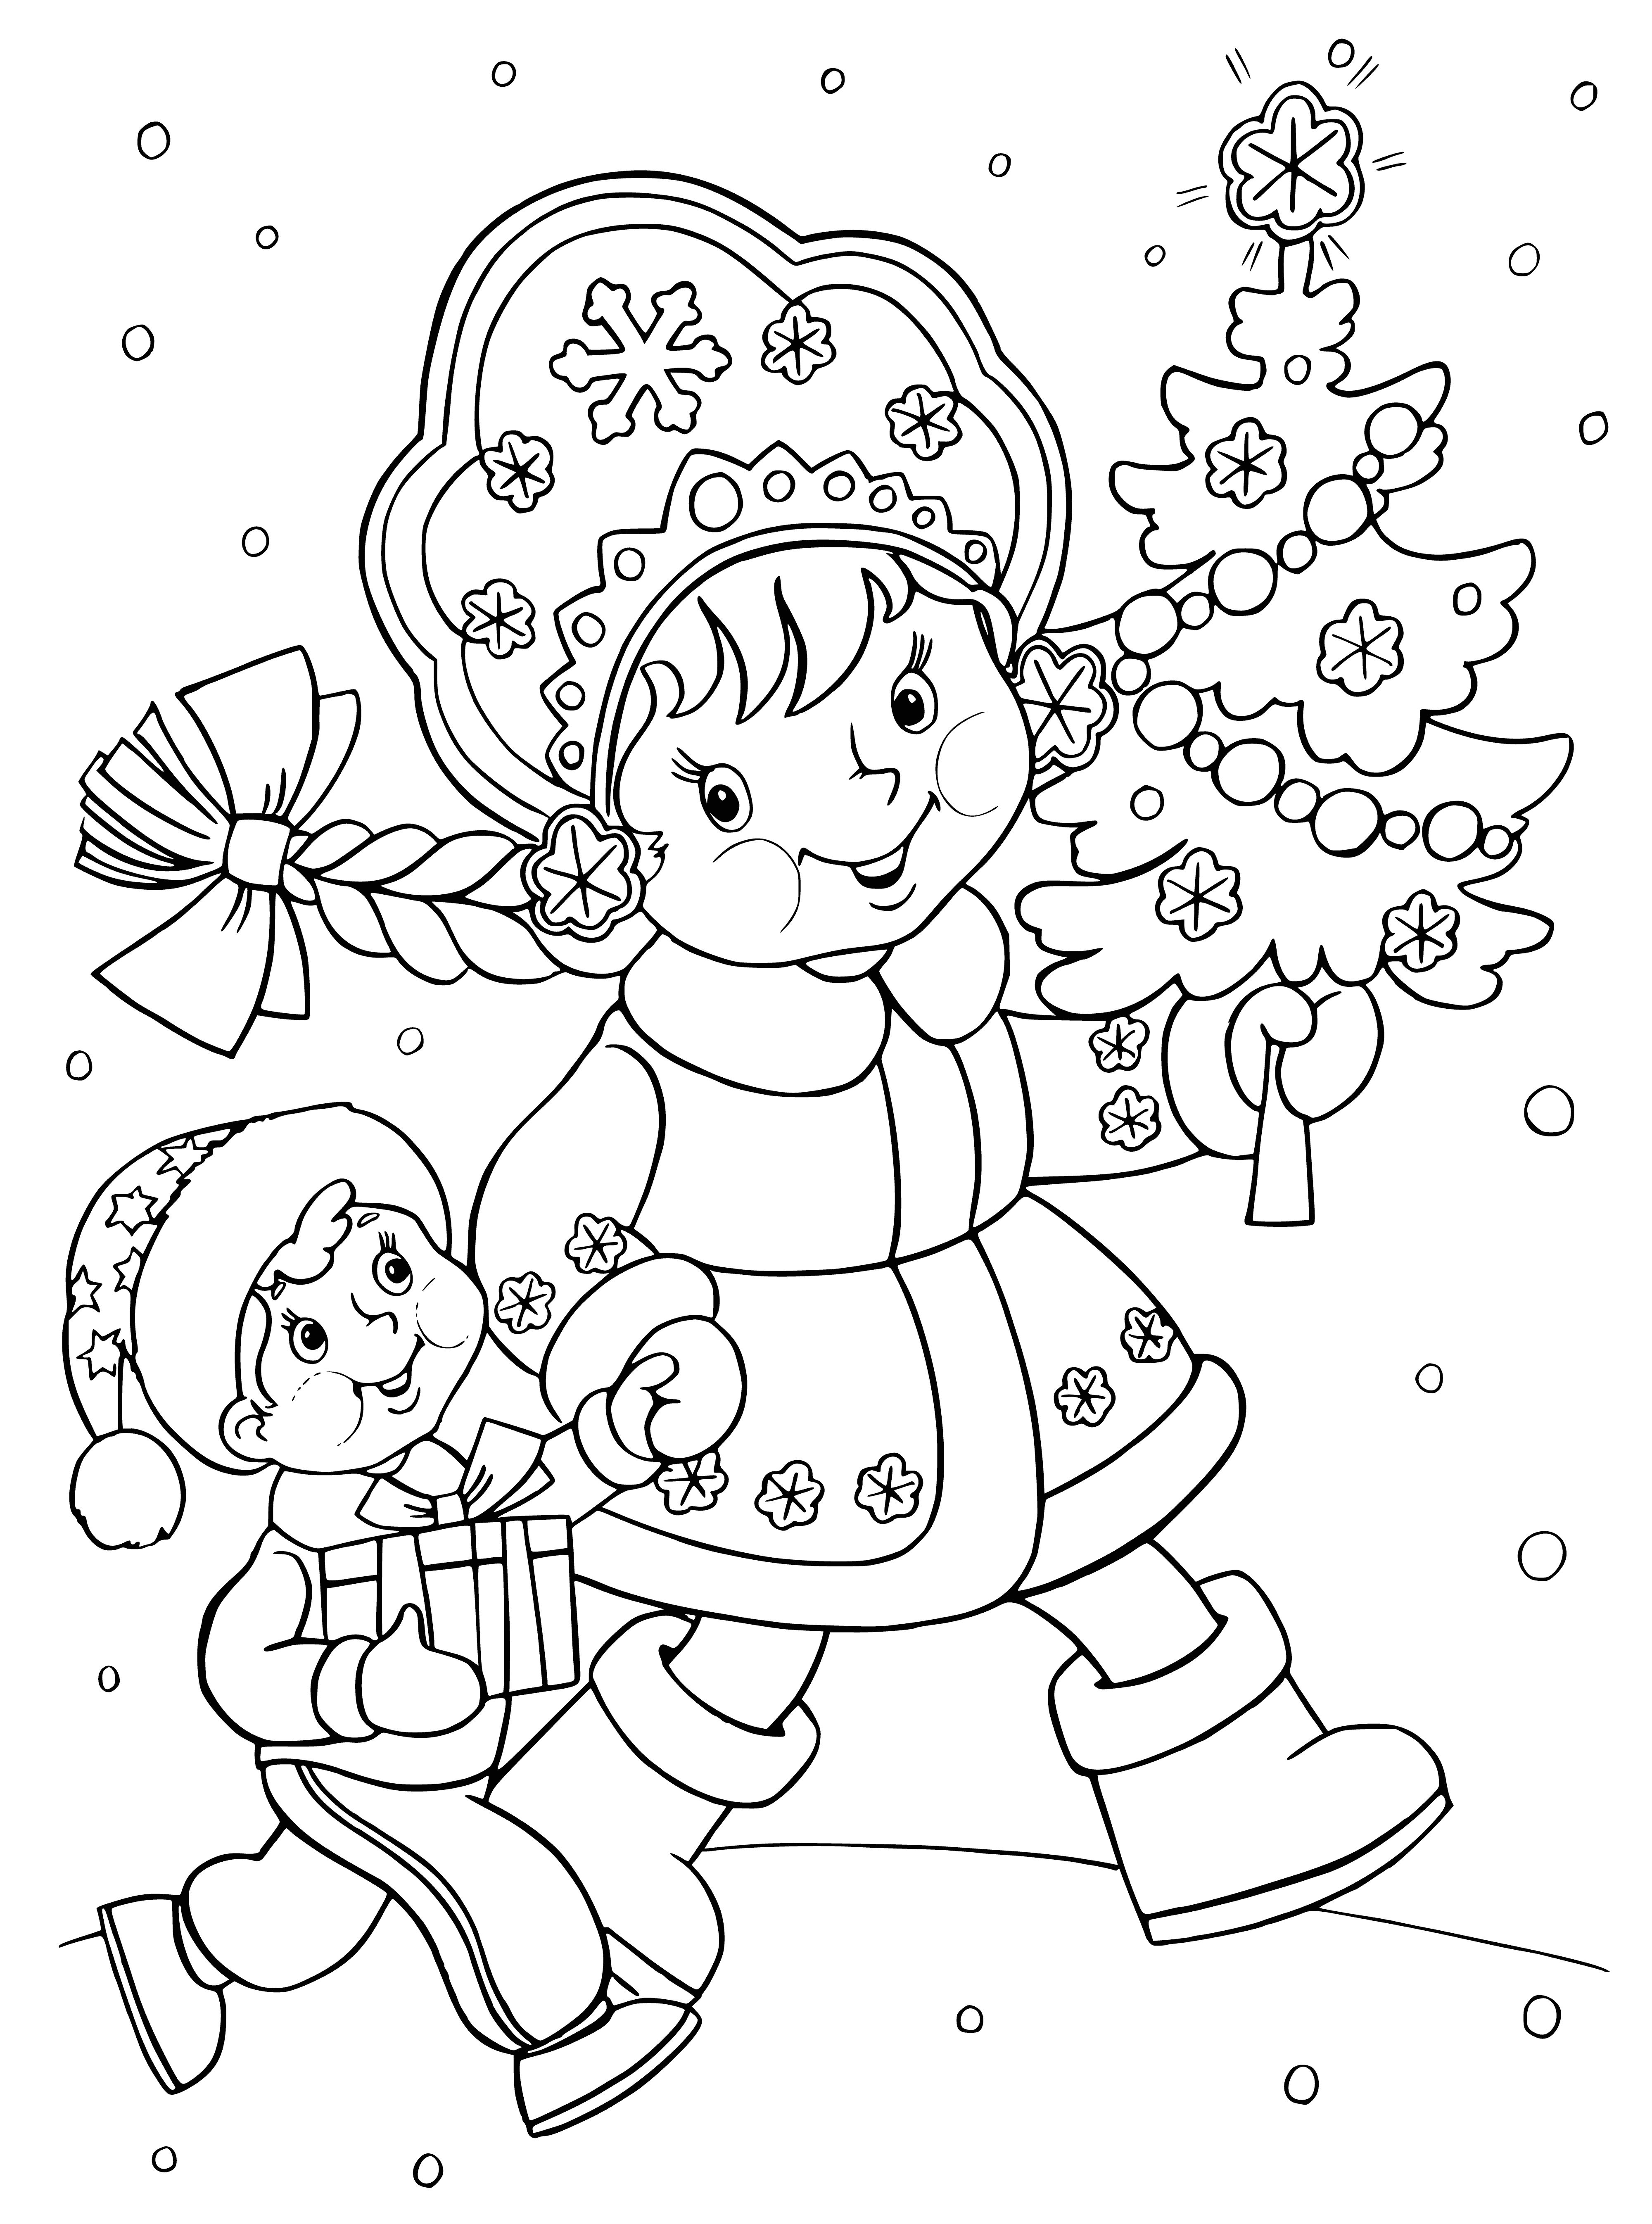 Snow Maiden holds gifts and decorates a tree - a beautiful coloring page w/ white dress, blue sash/scarf, fur cape, holly, ornaments, lights, star.